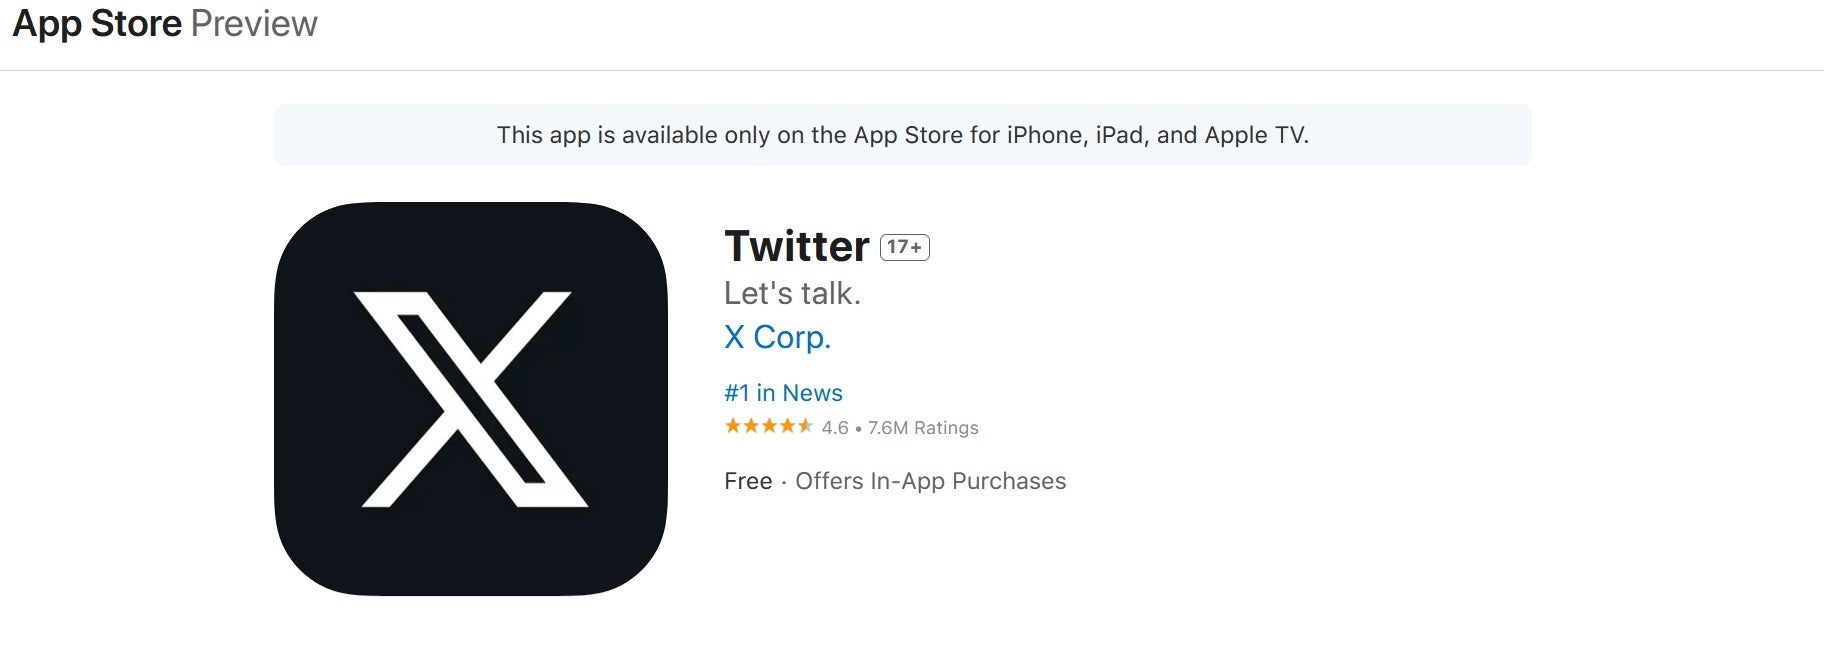 In the App Store, Twitter is still called Twitter - Apple has one simple reason why it won't allow Twitter to re-brand as "X" in the App Store